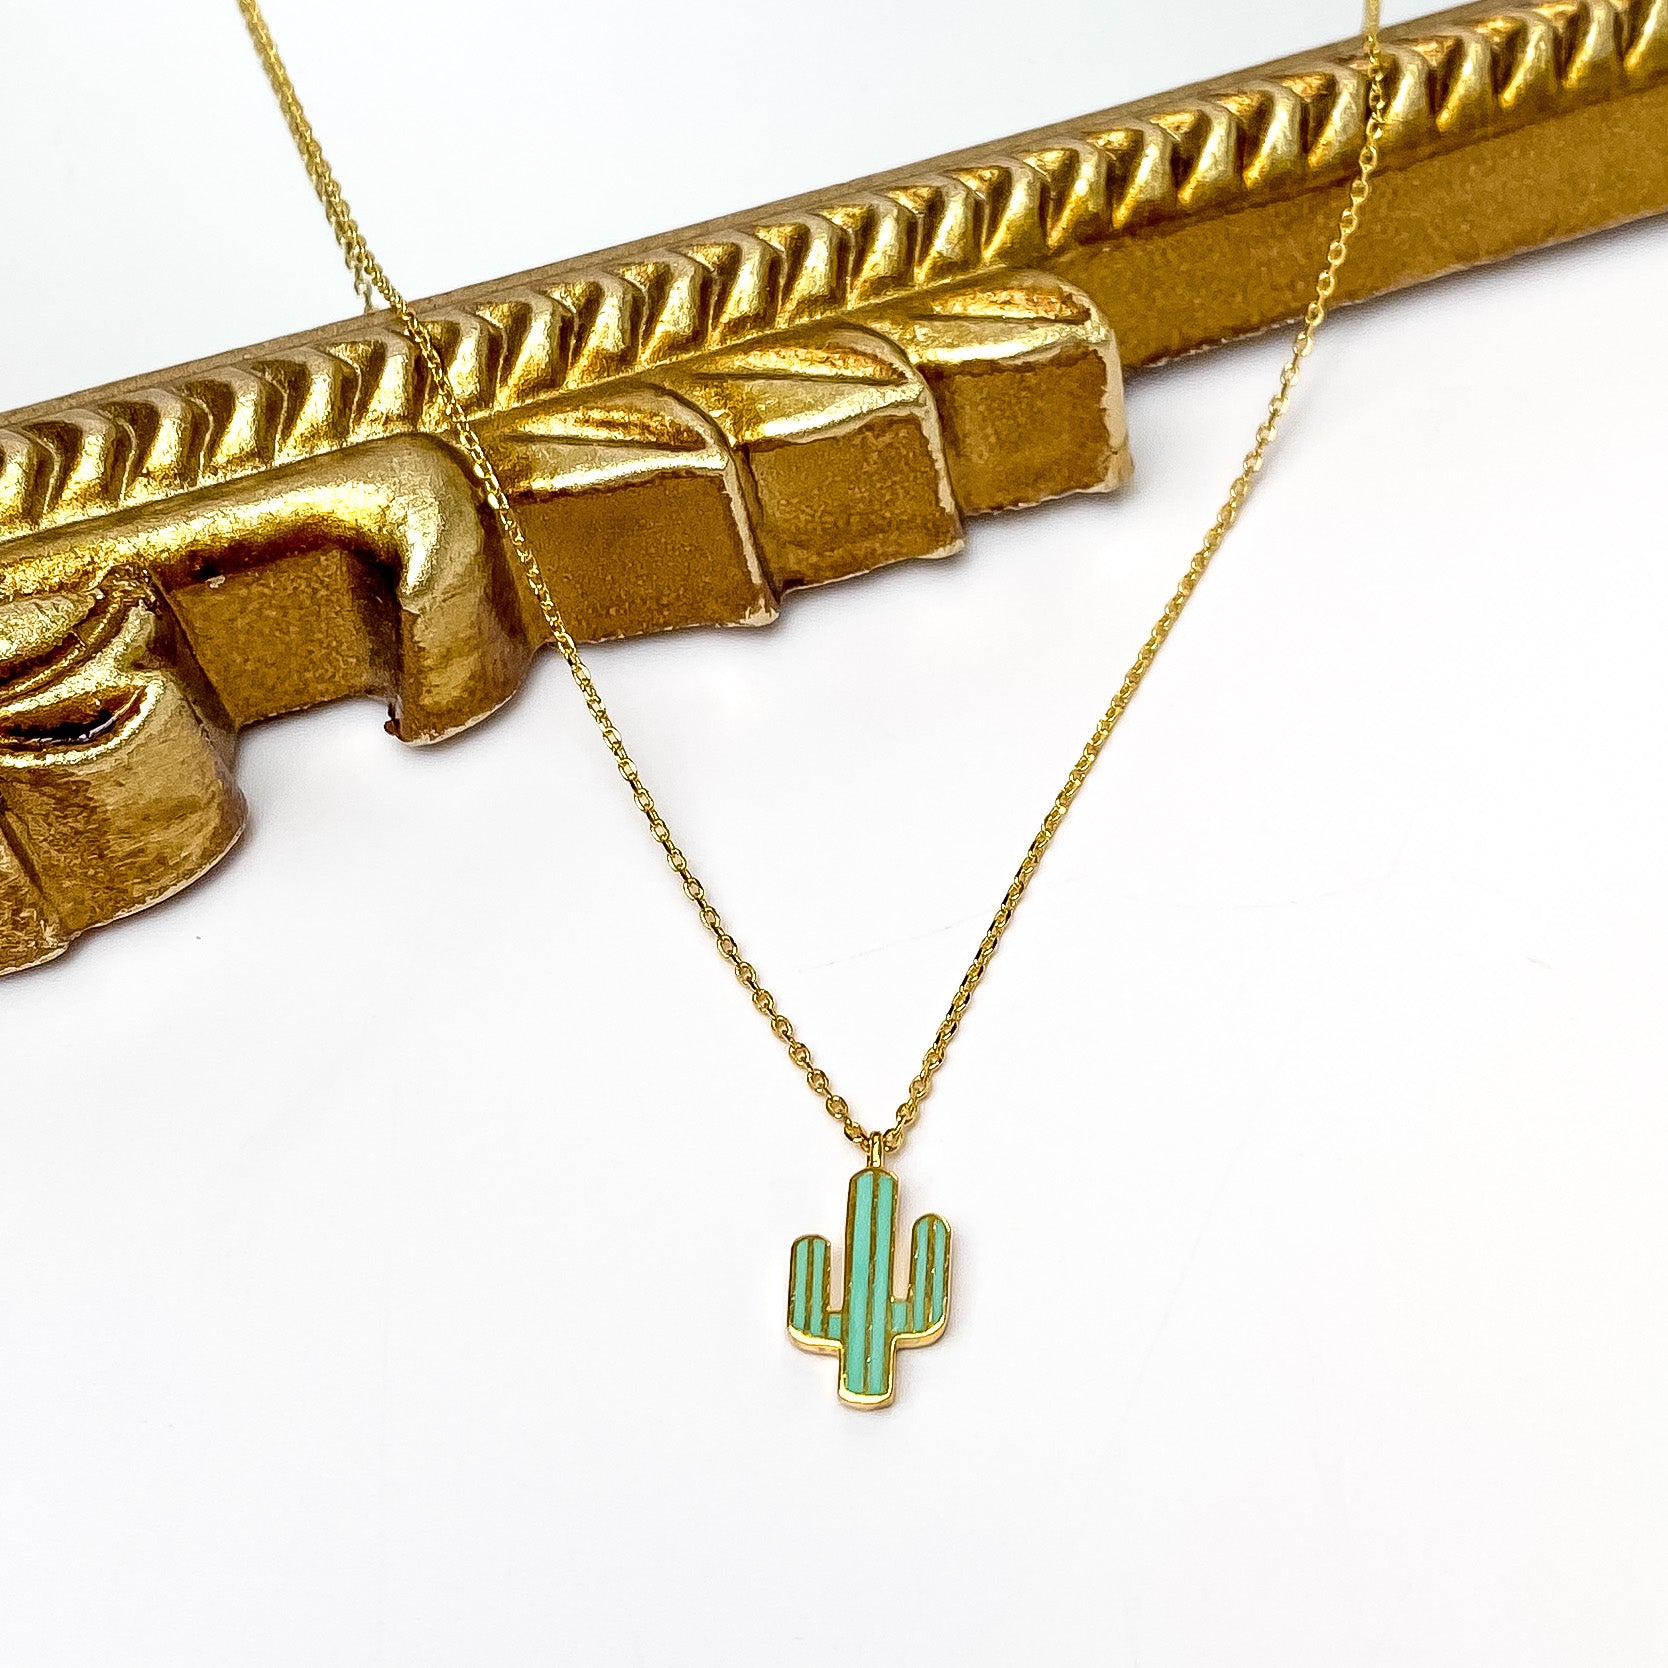 Gold Tone Necklace With Green Cactus Charm. Pictured on a white background with part of the necklace laying on a mirror with gold trim.